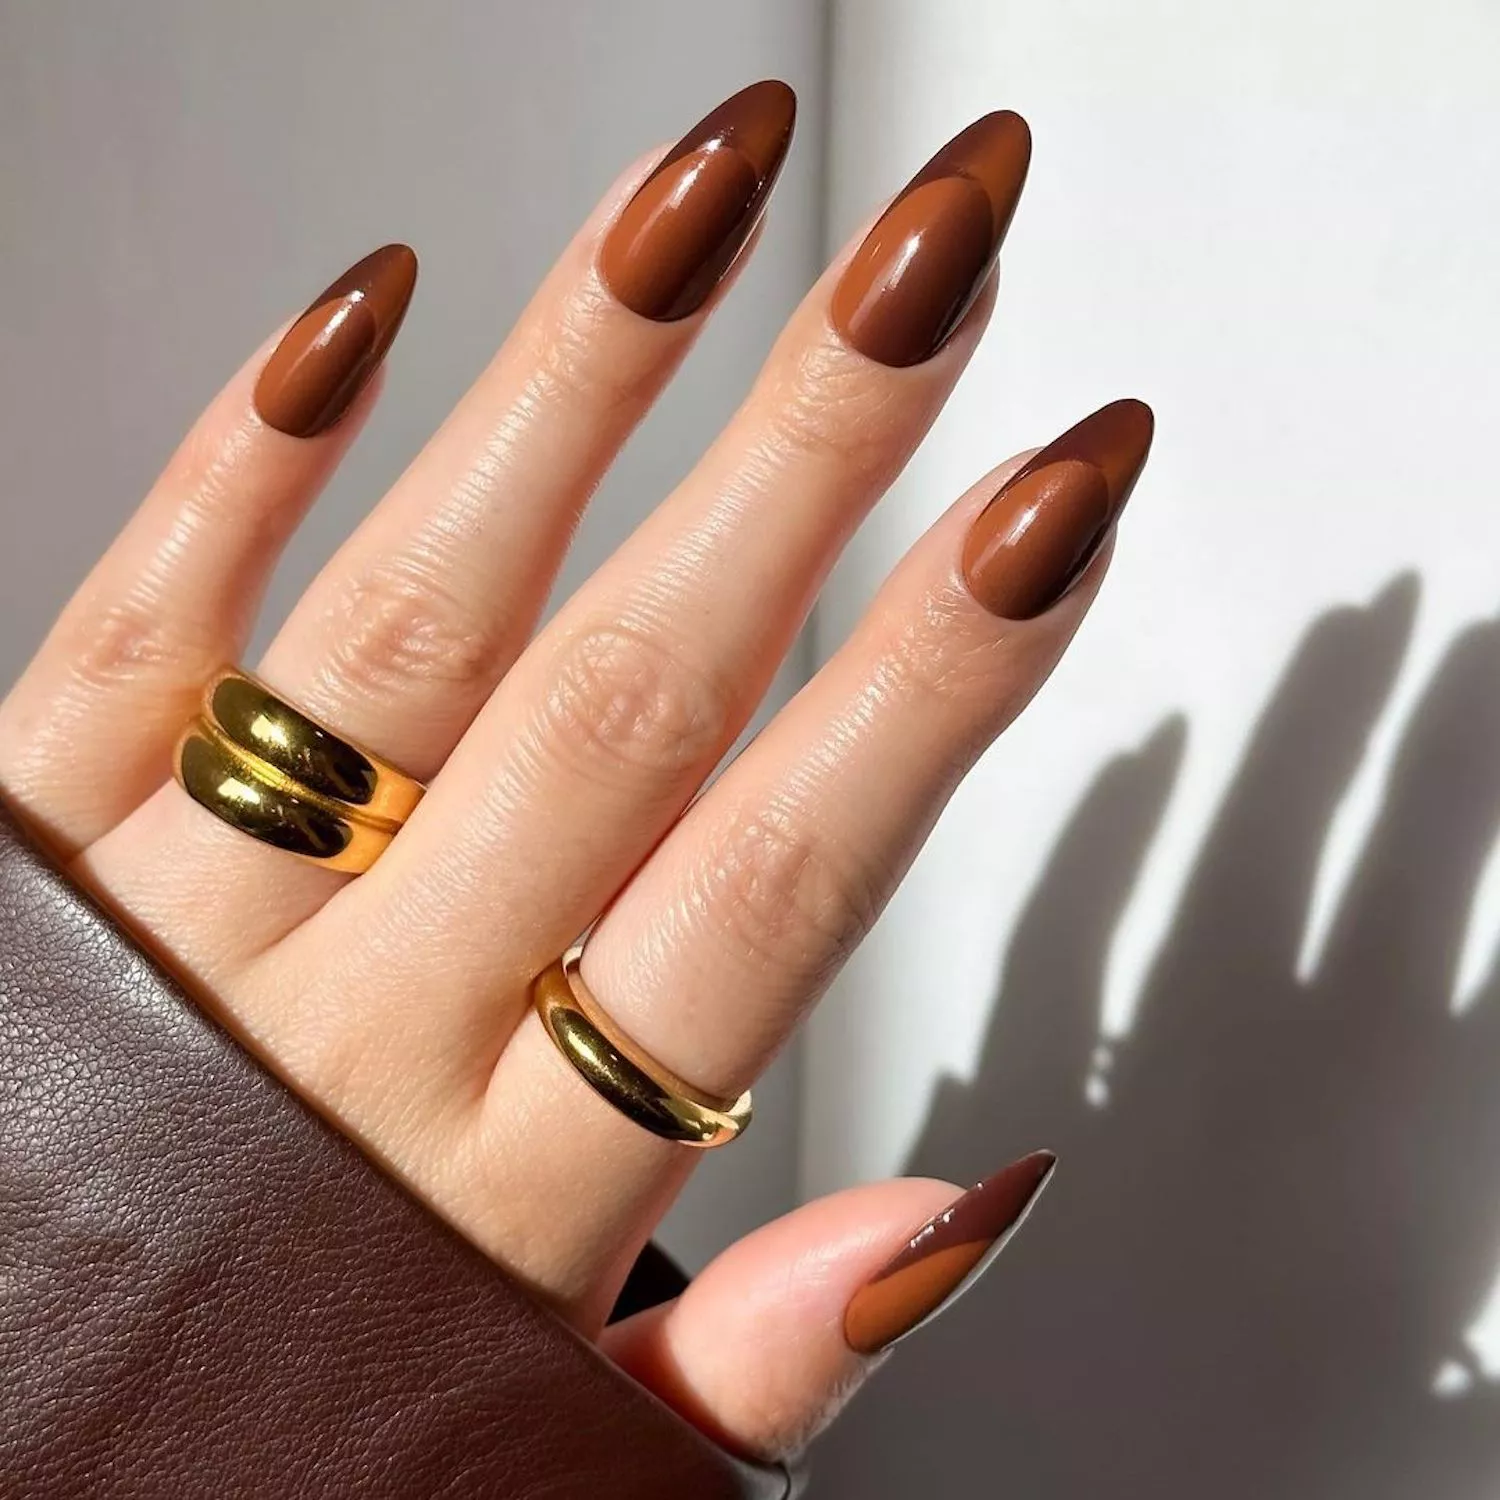 Brown French manicure with glossy base and matte tips